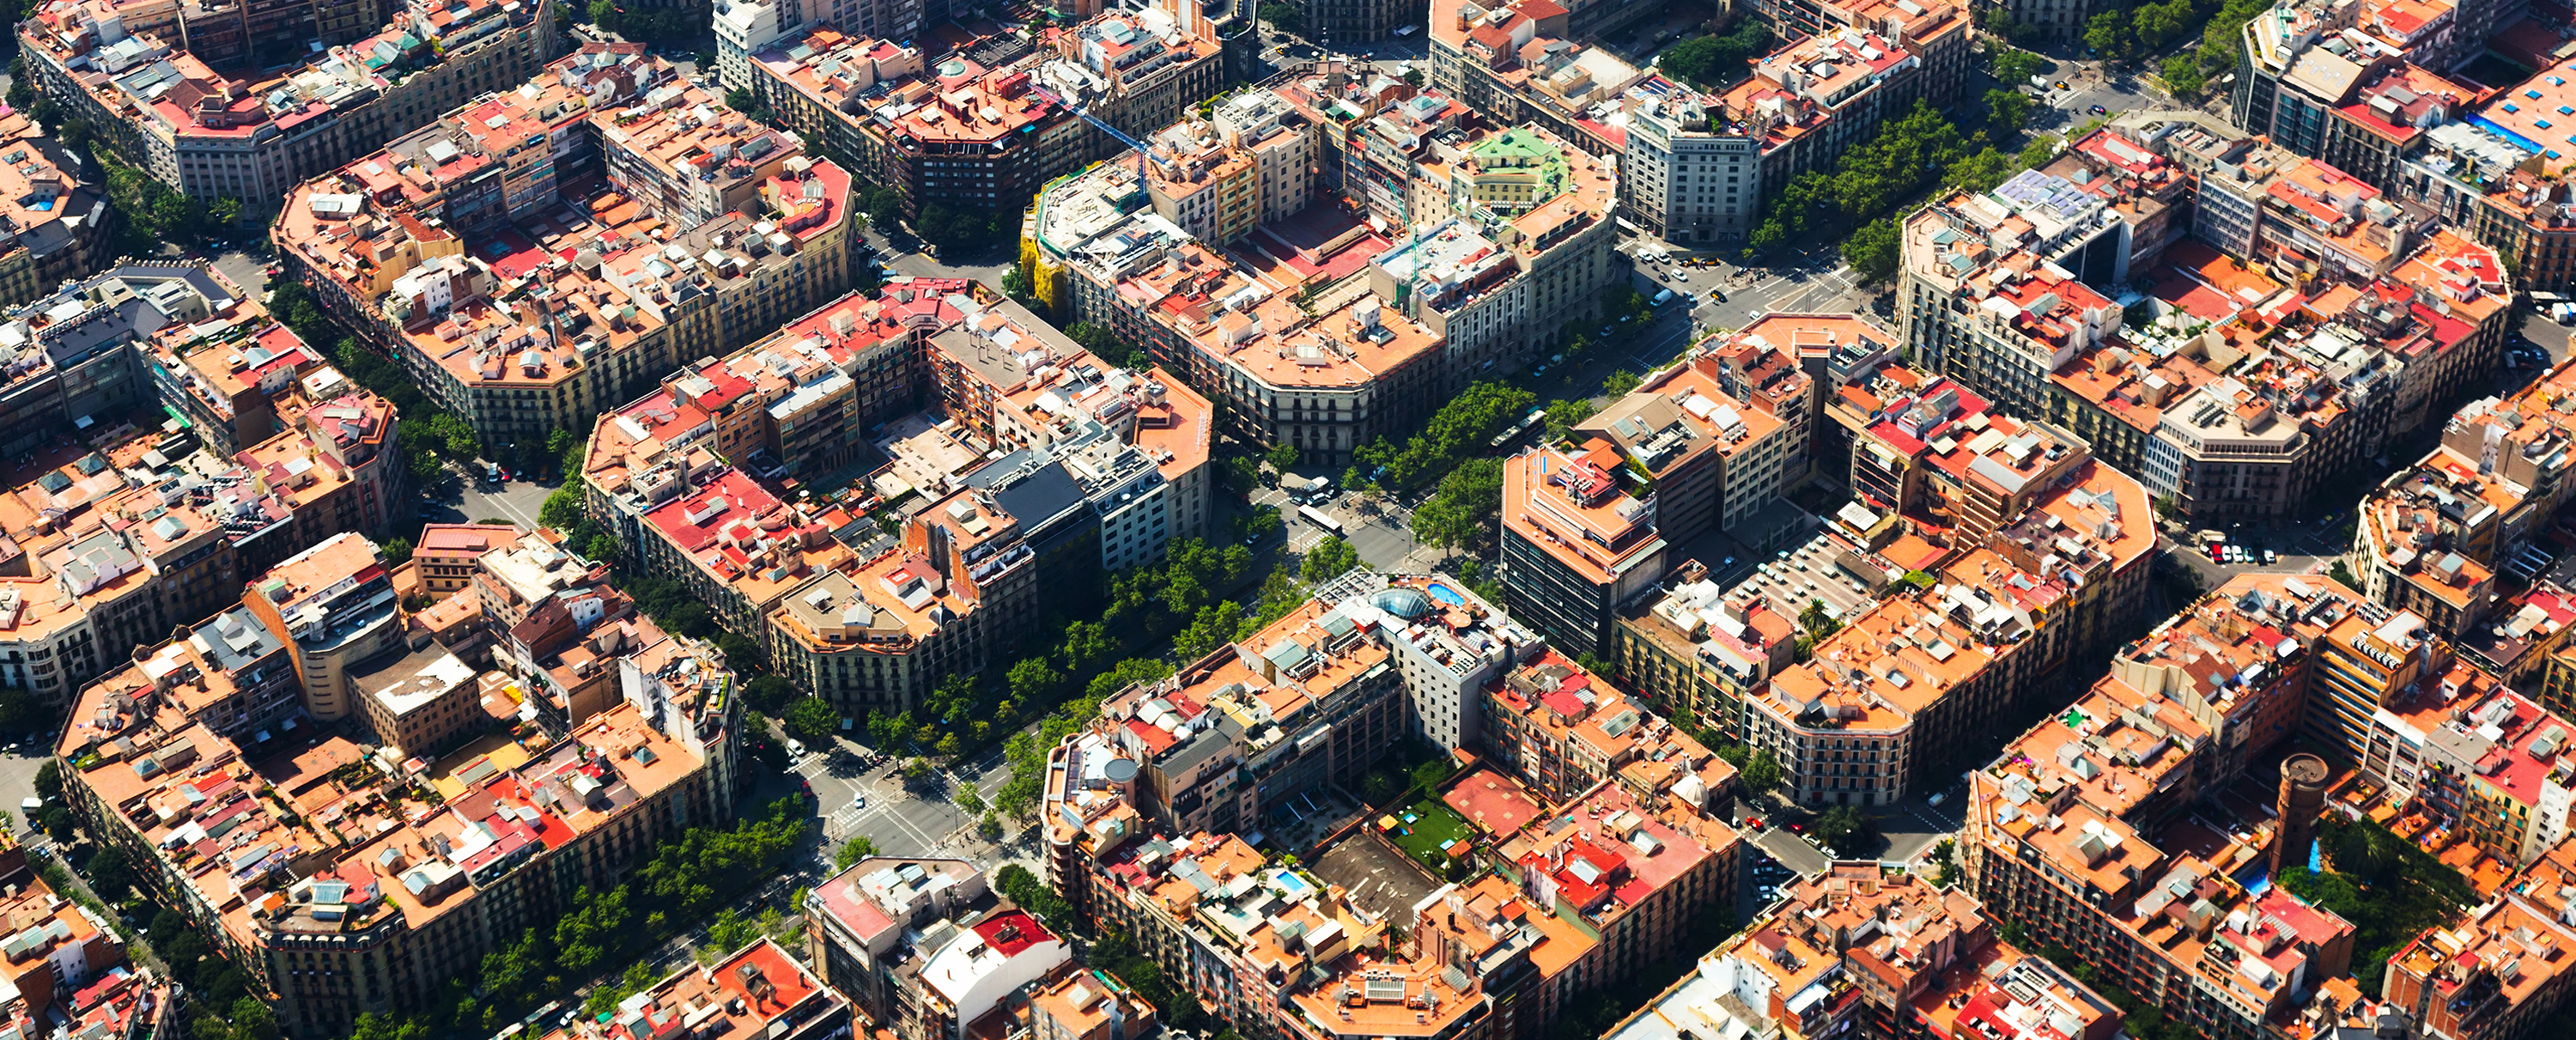 What Makes Barcelona One of the Smartest Cities the World? | Digital Trends